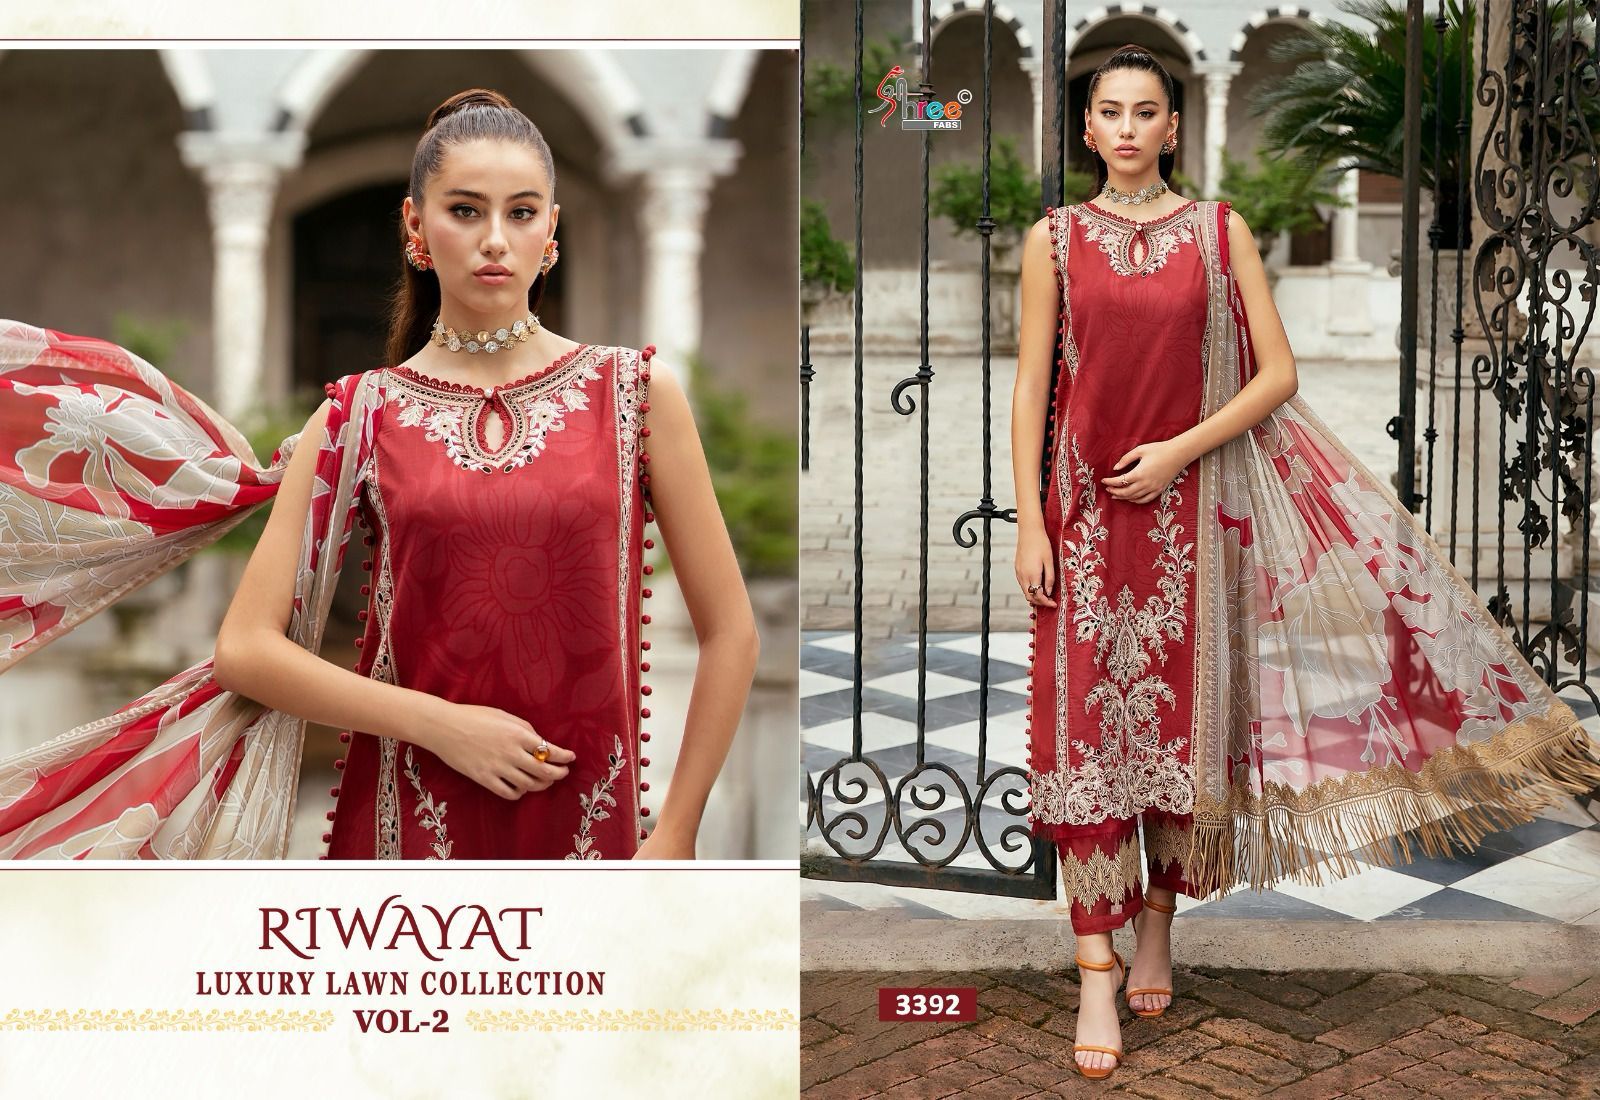 Shree Riwayat Luxury Lawn Collection Vol 2 collection 1